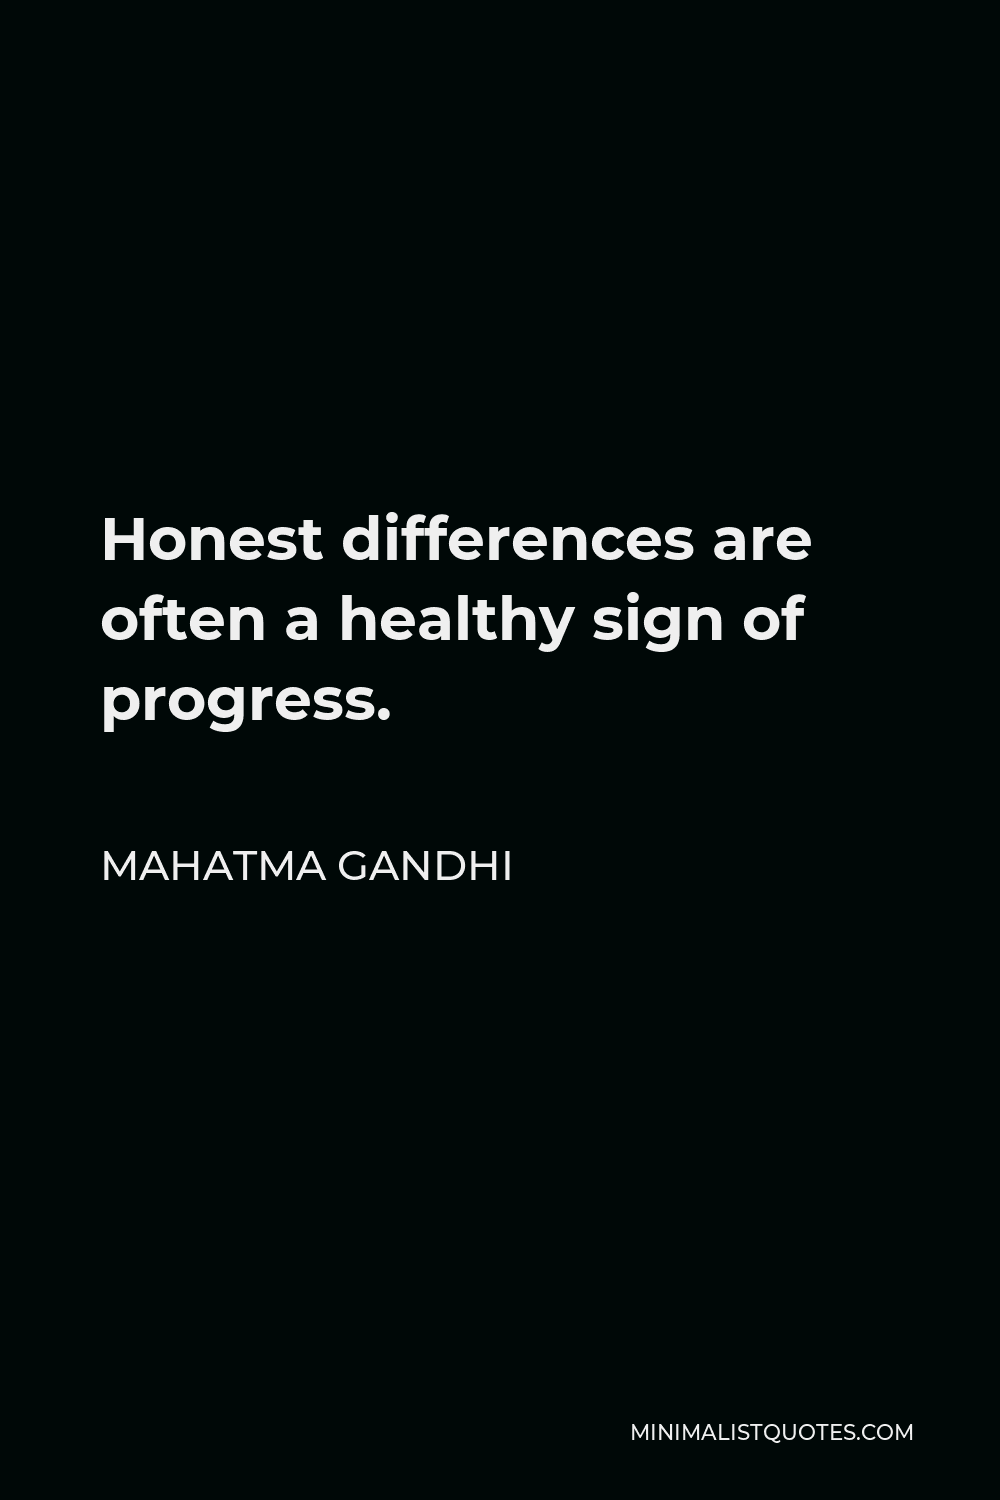 Mahatma Gandhi Quote - Honest differences are often a healthy sign of progress.